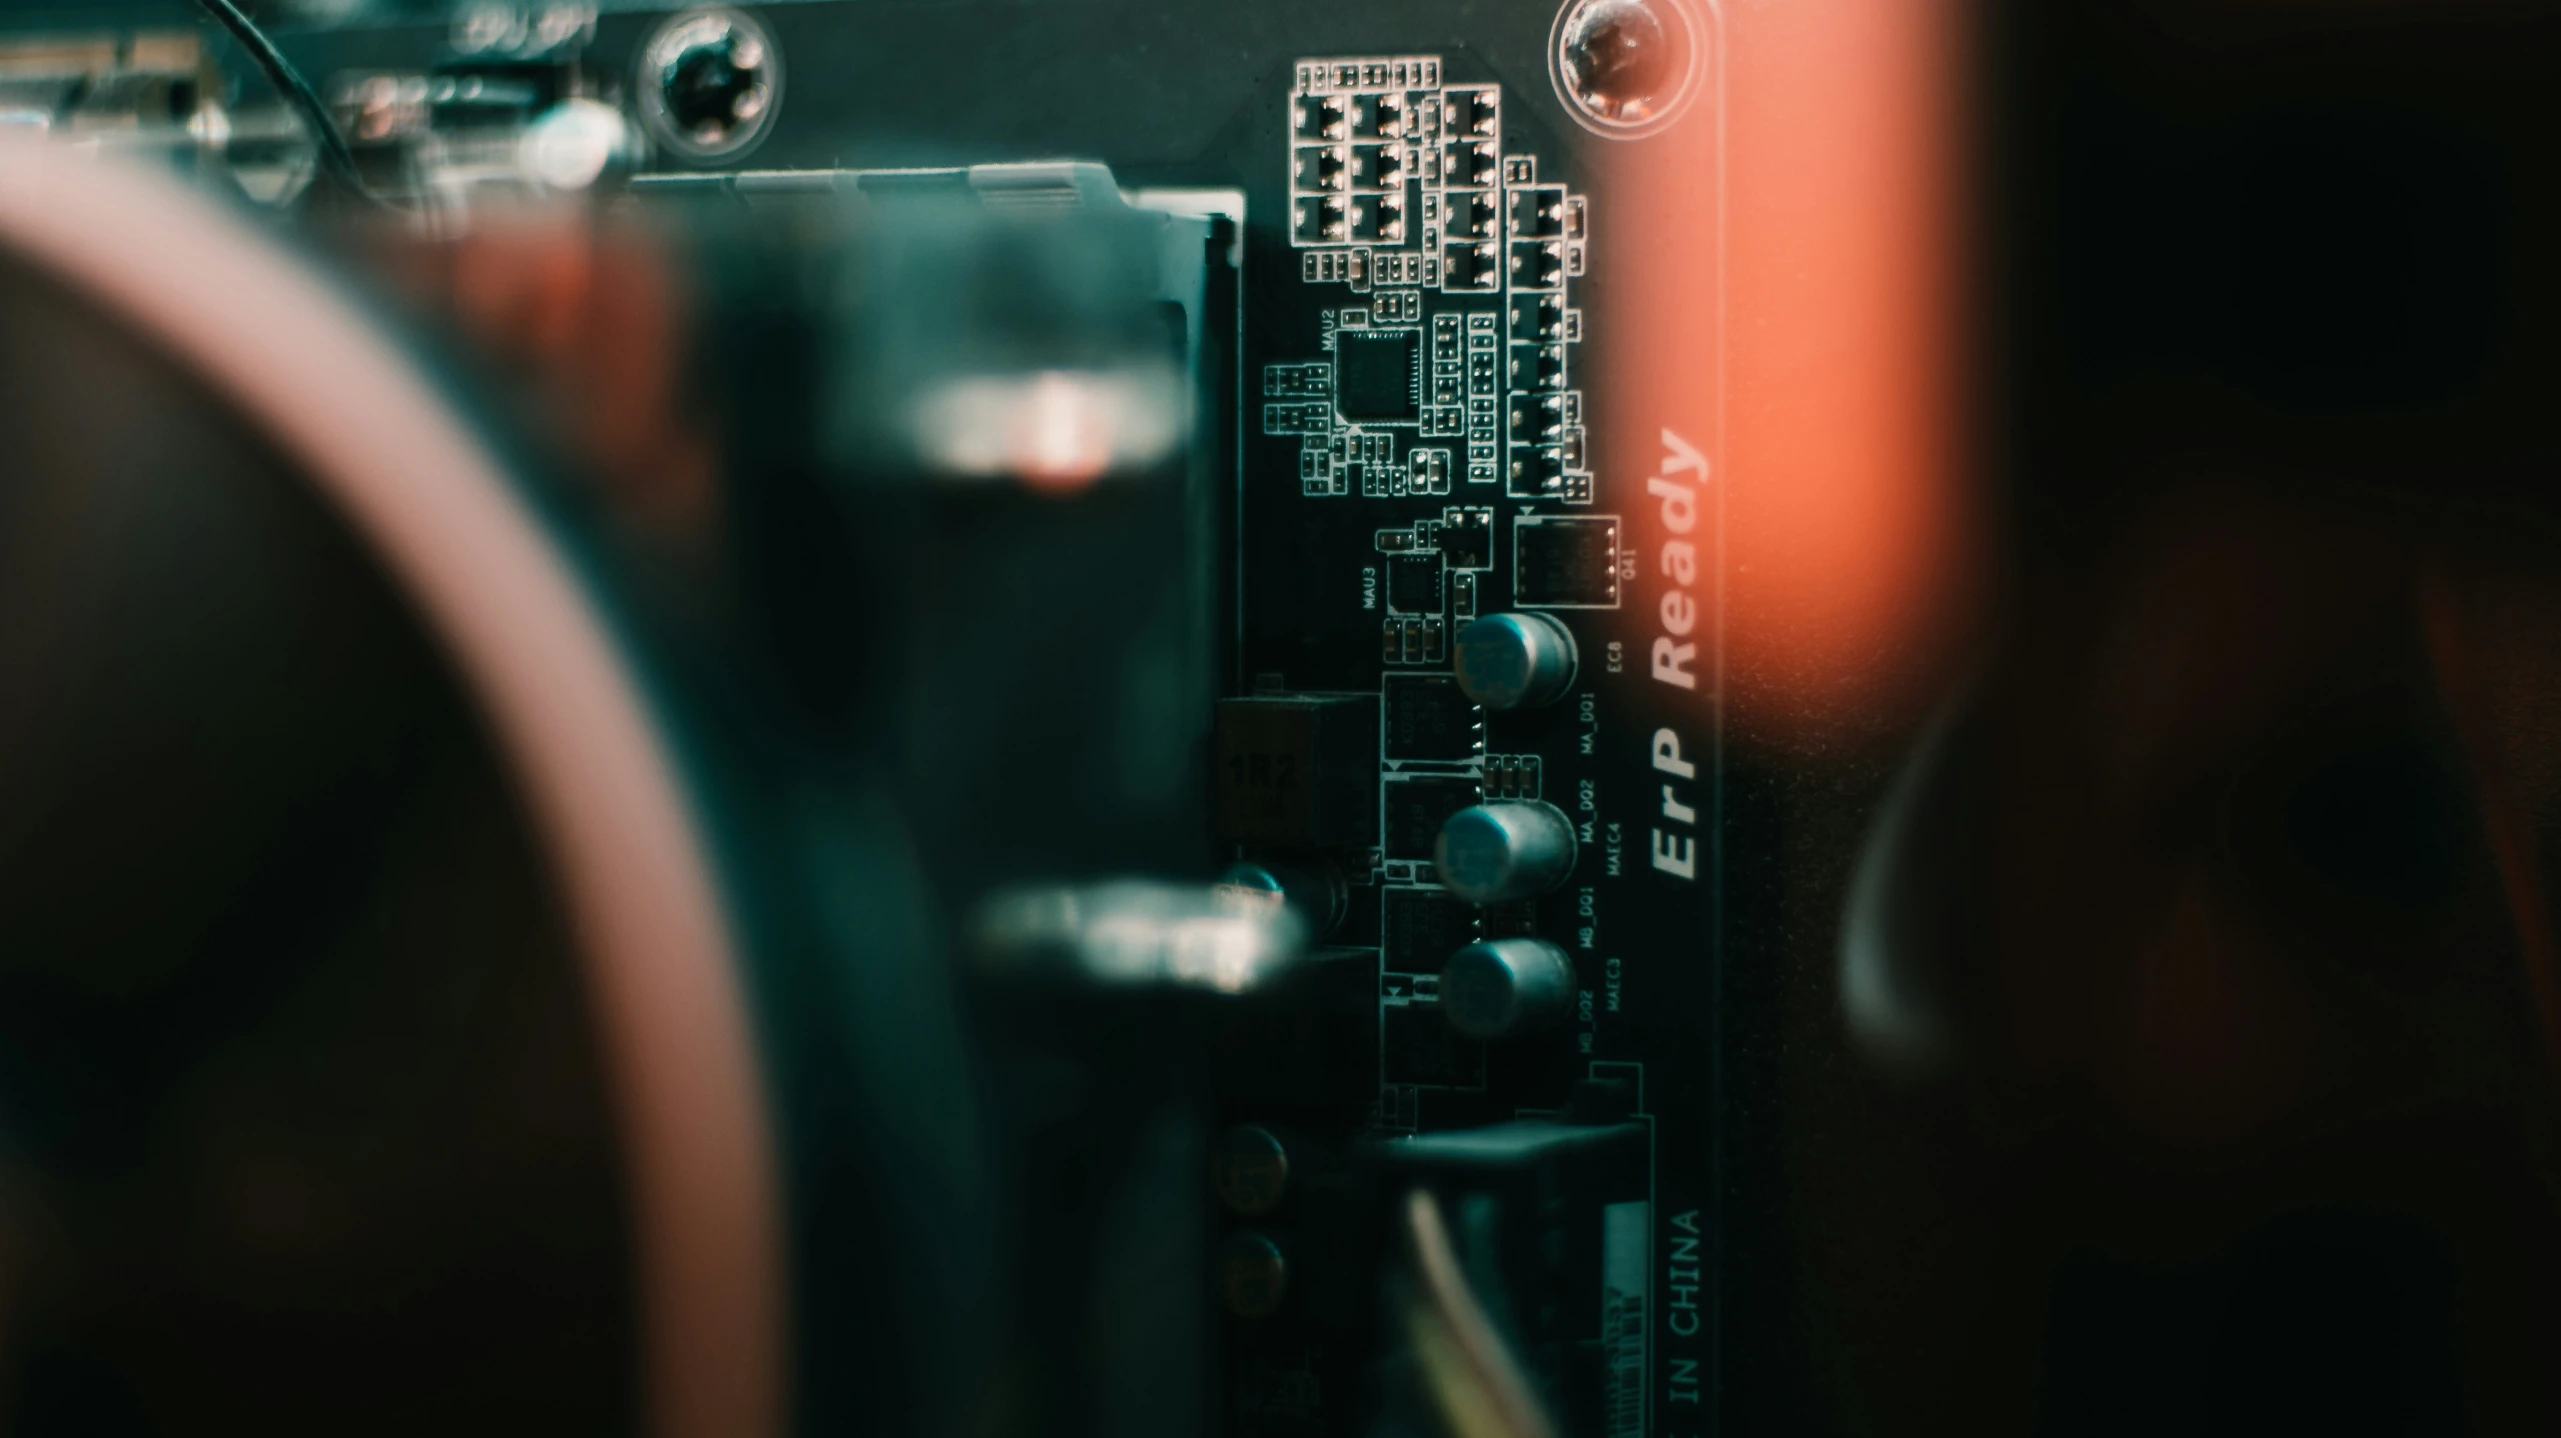 close up view of circuit board in dark room